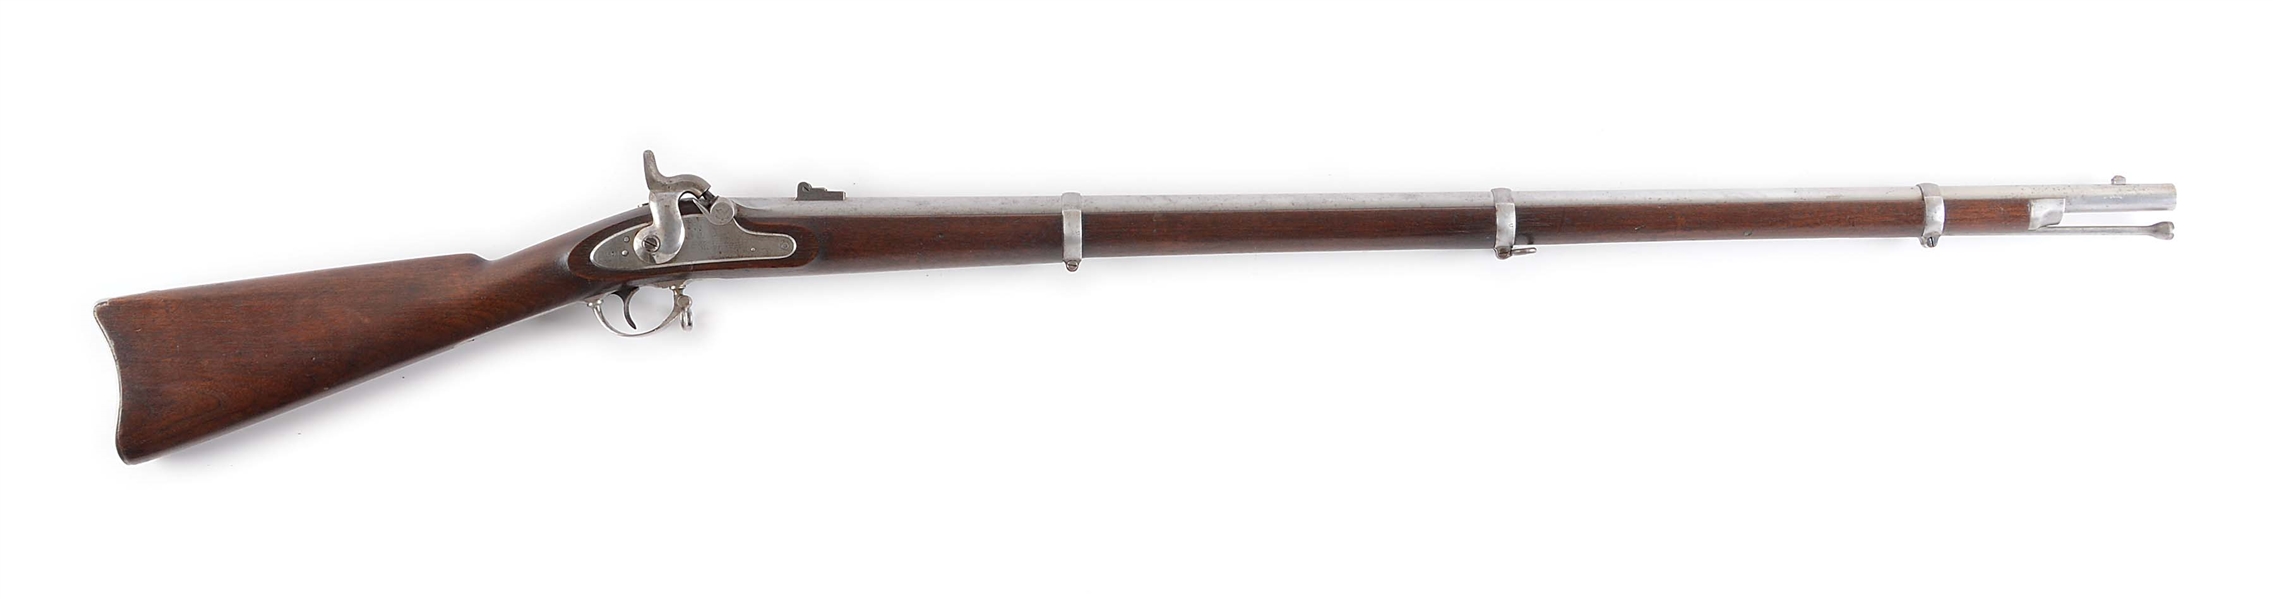 (A) COLT SPECIAL MODEL 1861 CIVIL WAR PERCUSSION RIFLED MUSKET DATED 1863.